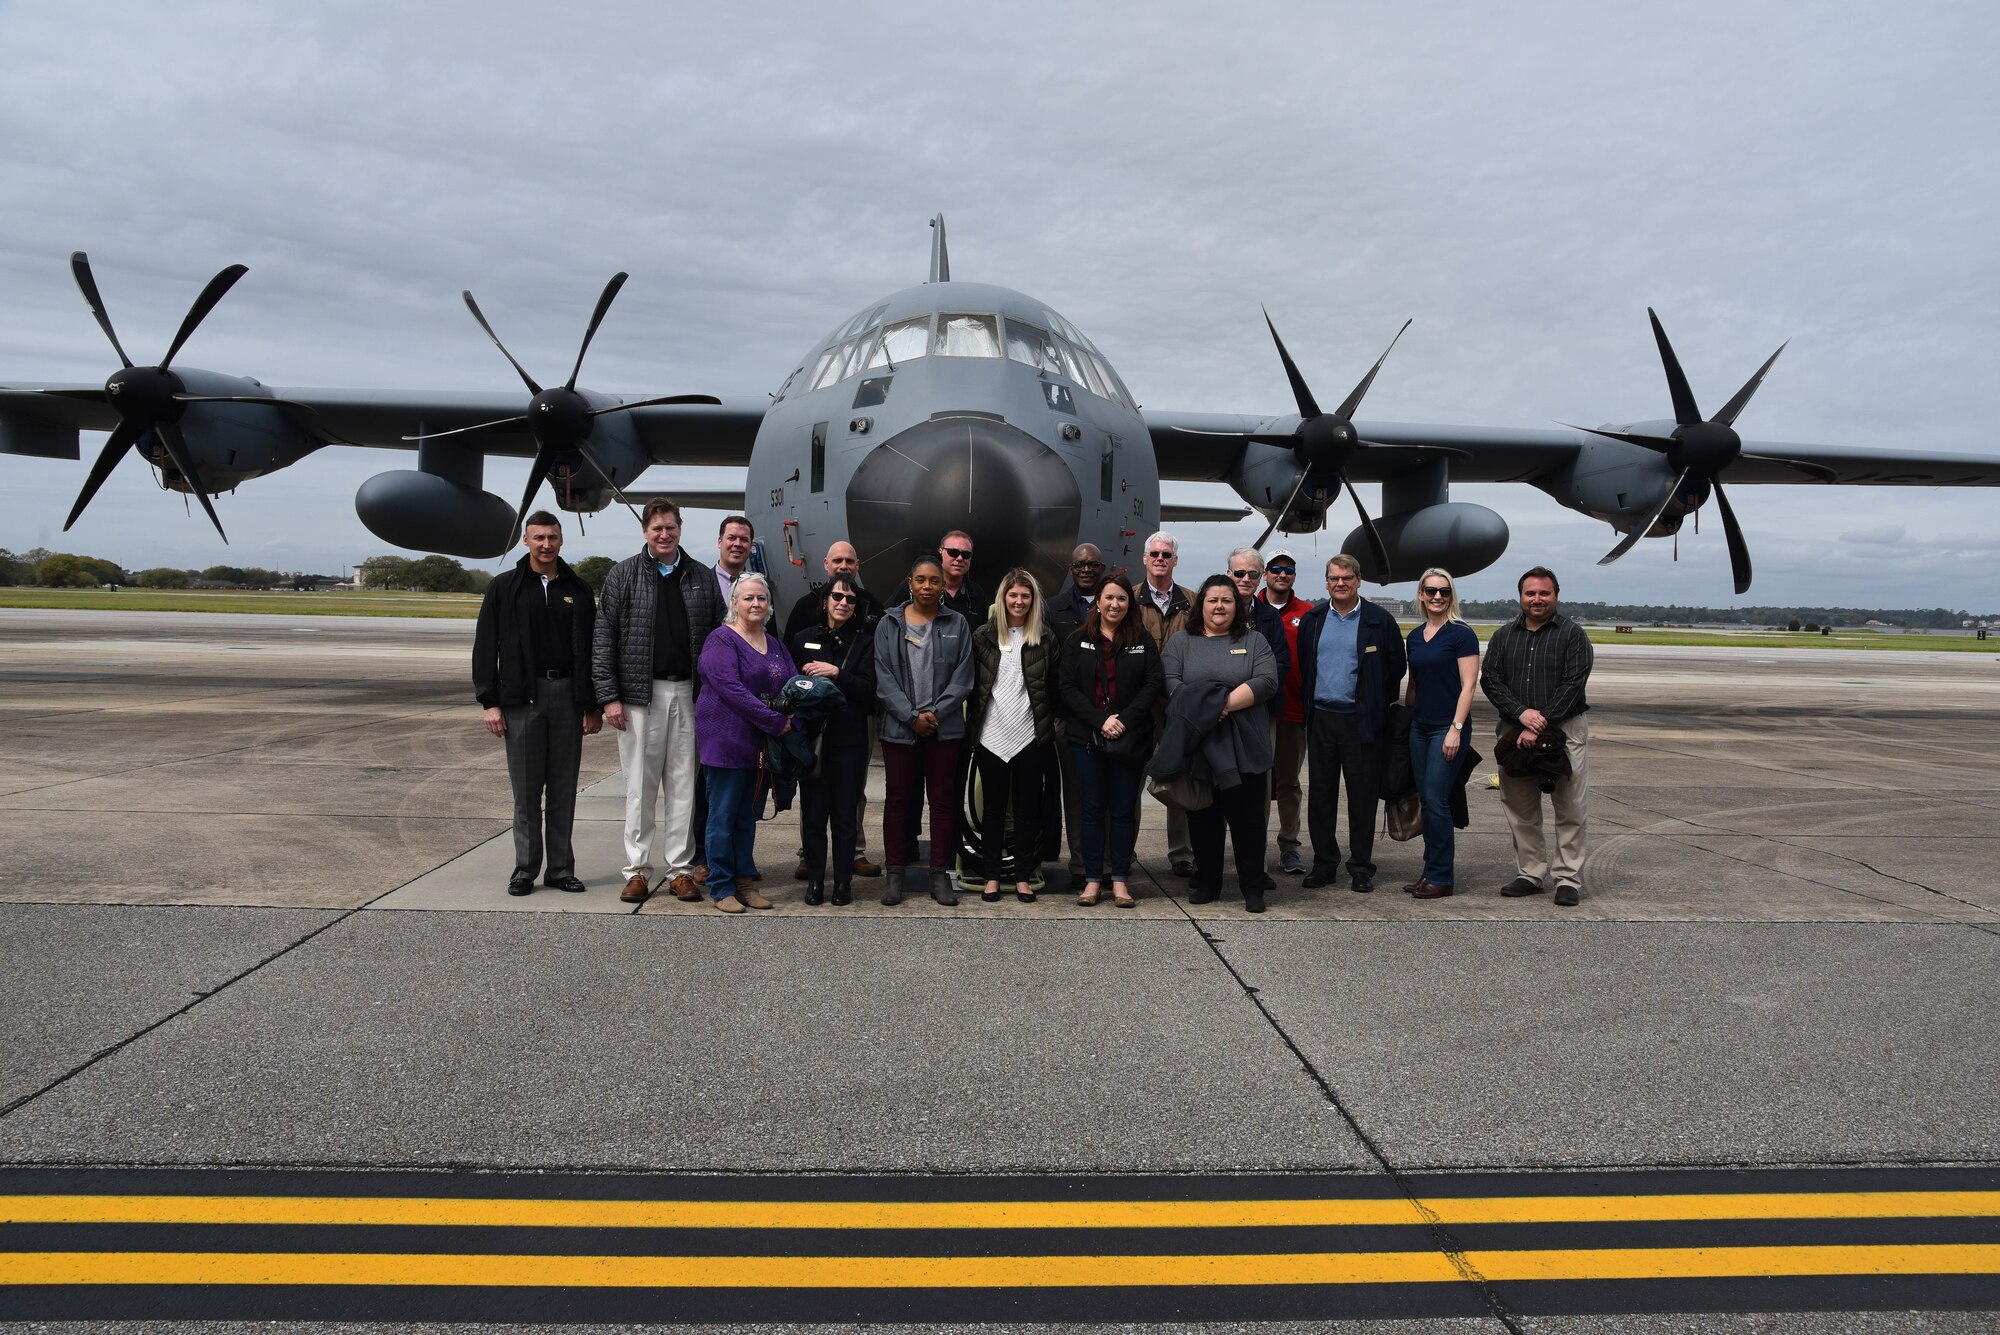 The 403rd Wing, an Air Force Reserve Command unit on Keesler Air Force Base, Miss., hosted Honorary Commanders for a tour and flight March 8, 2019. The local civic leaders were informed about the Air Force Reserve and wing missions. (U.S. Air Force photo by Tech. Sgt. Michael Farrar)